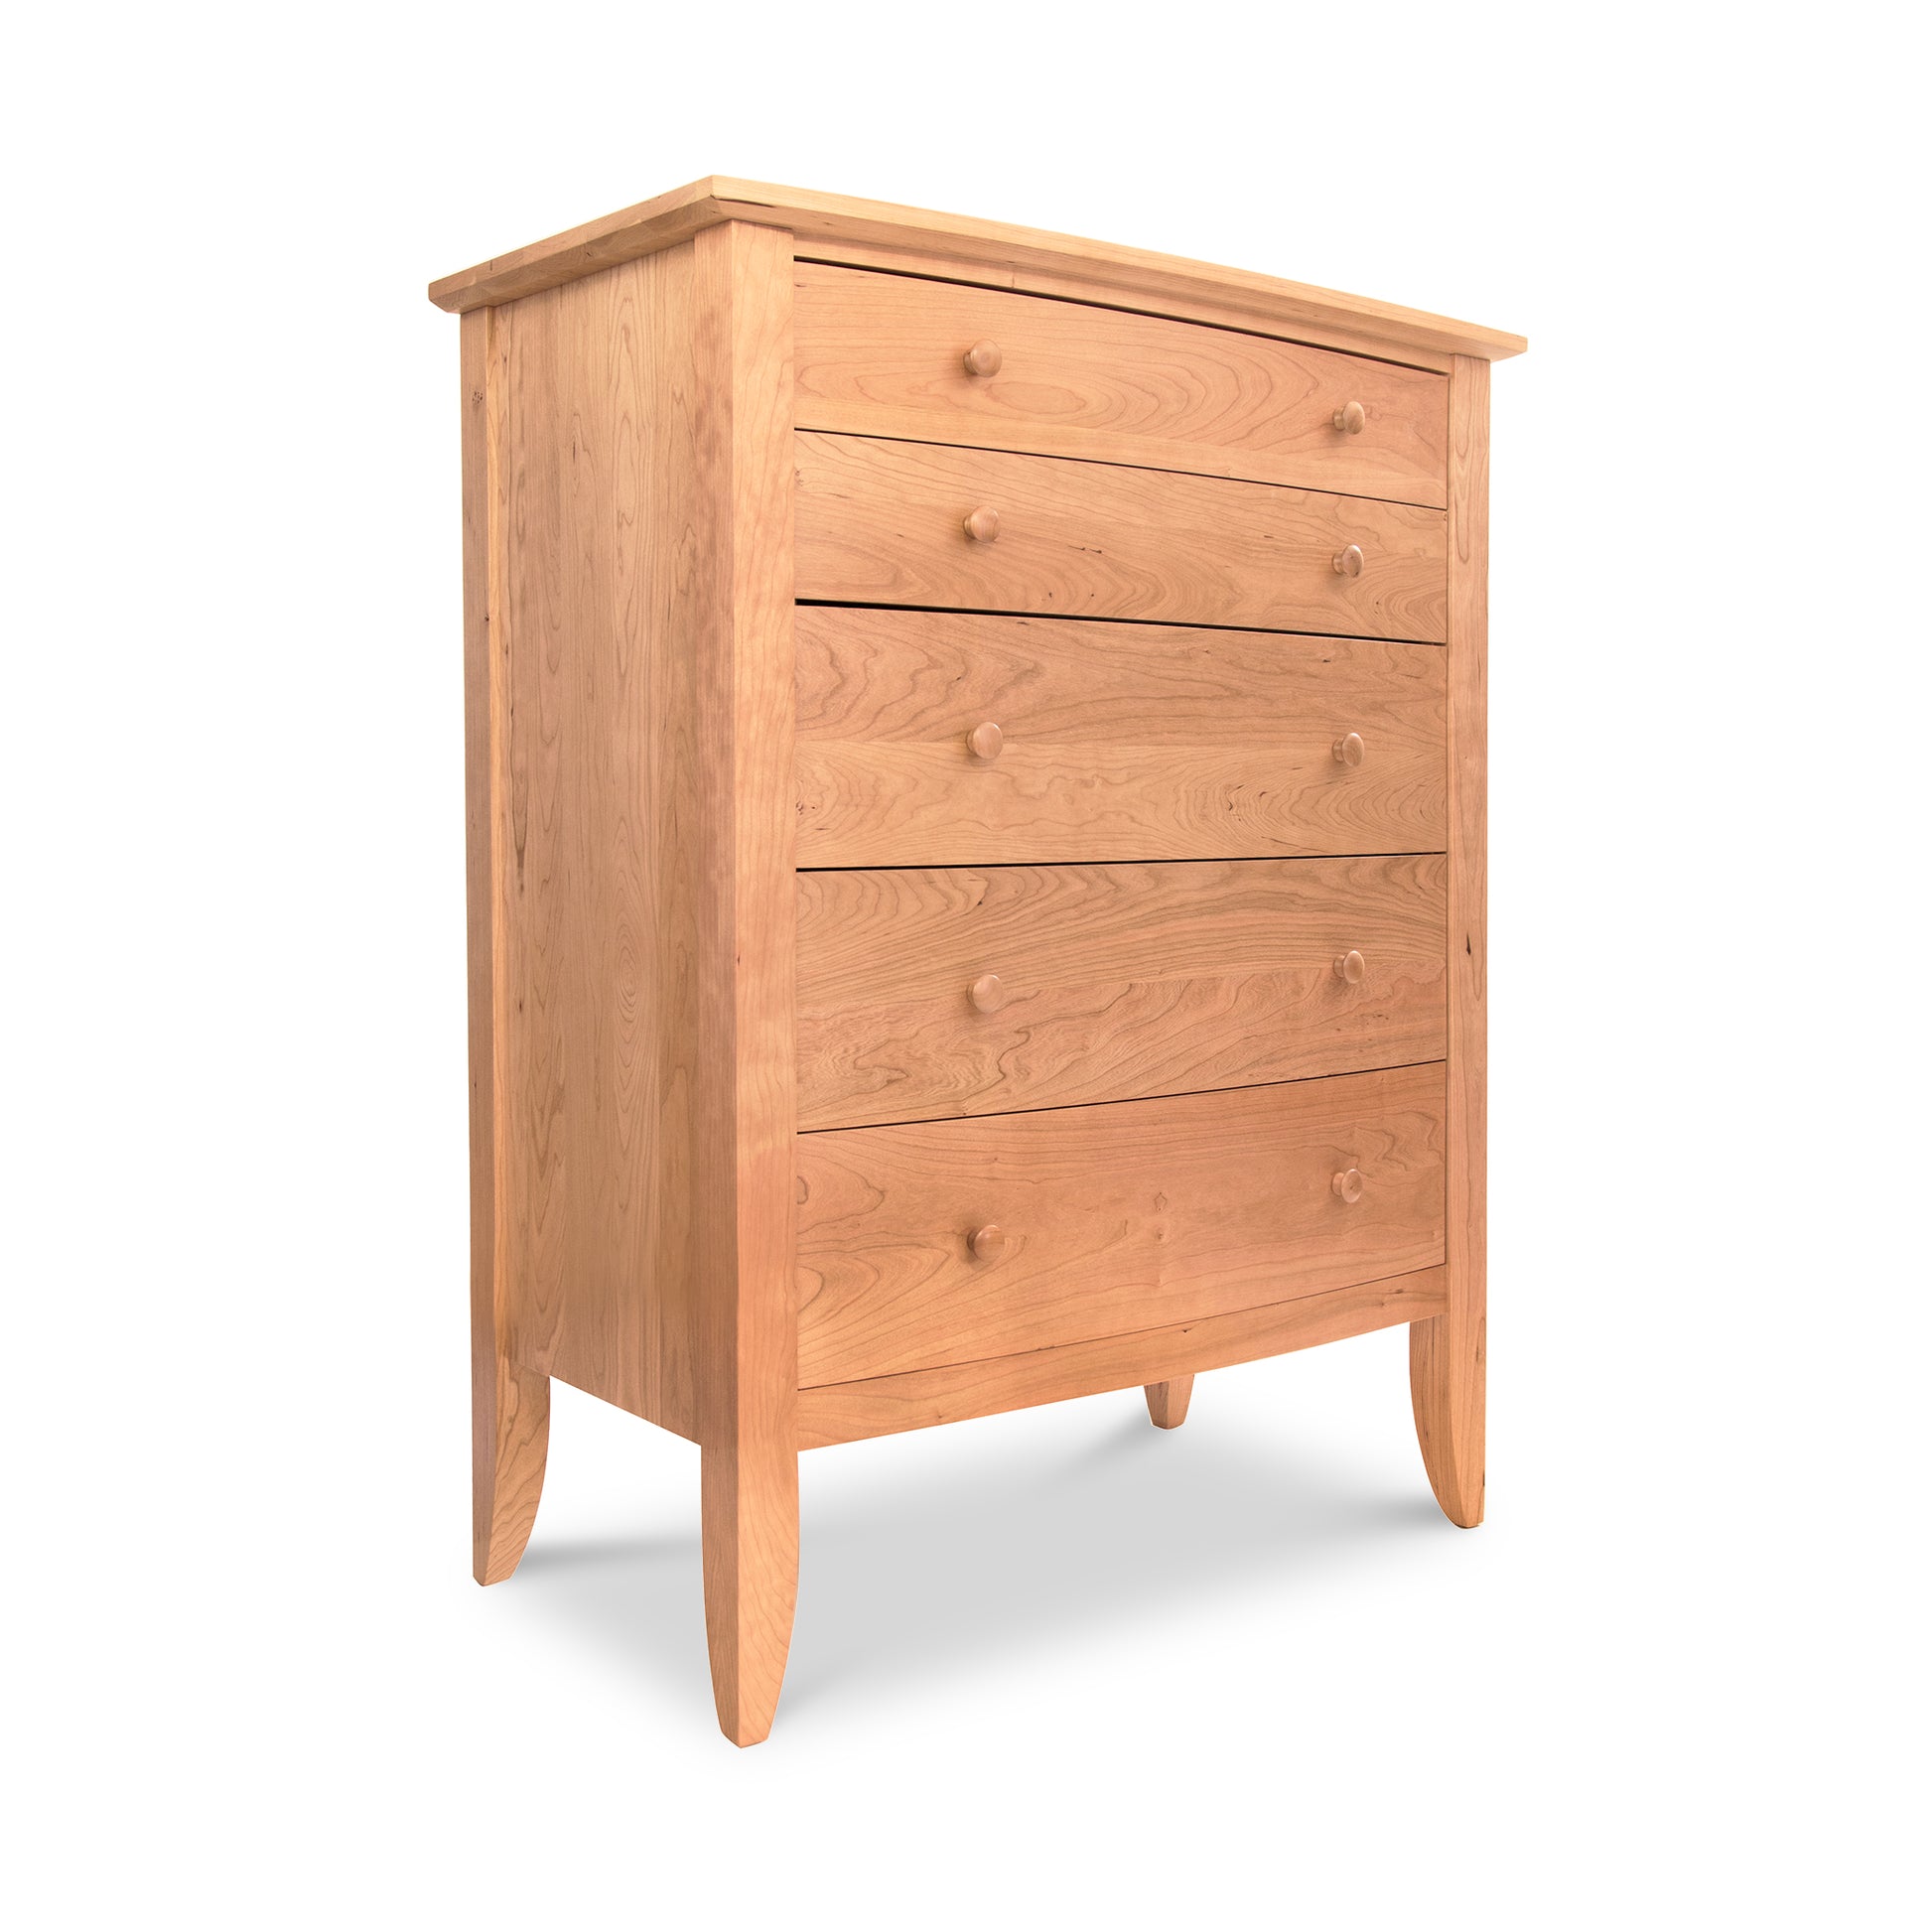 A handmade Lyndon Furniture Bow Front 5-Drawer Chest made of hardwoods, placed on a white background.